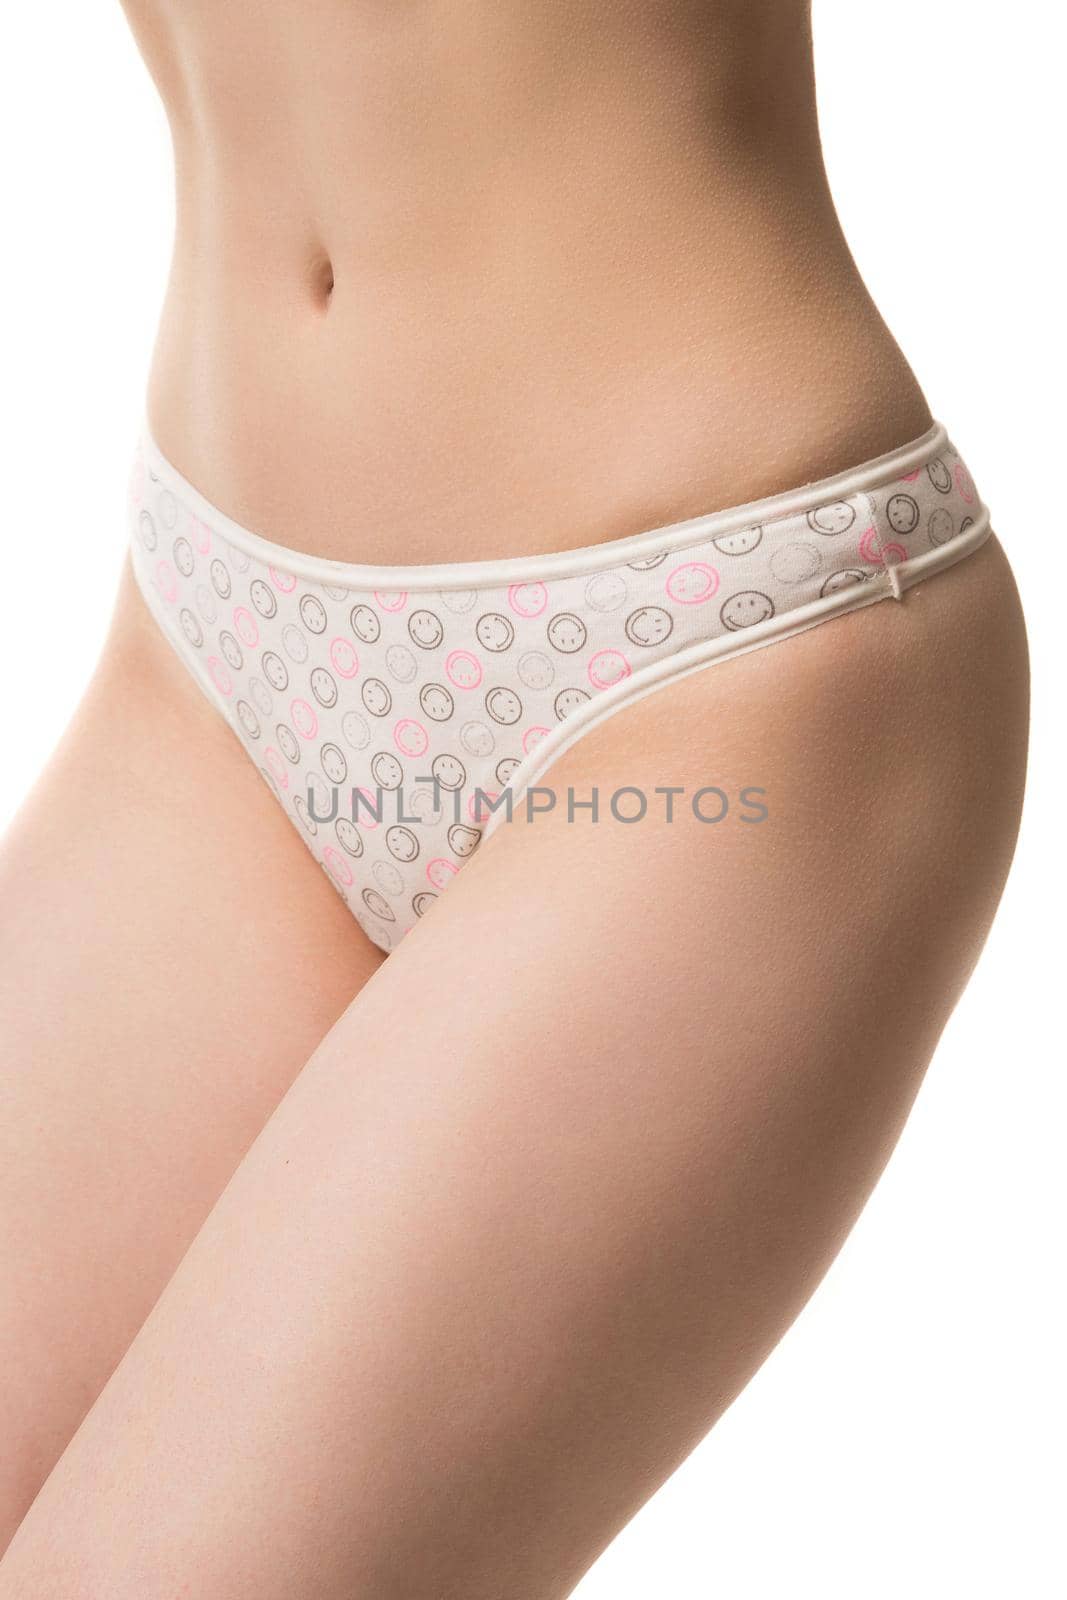 slim female body on a white background, panties, half-length shot by TRMK